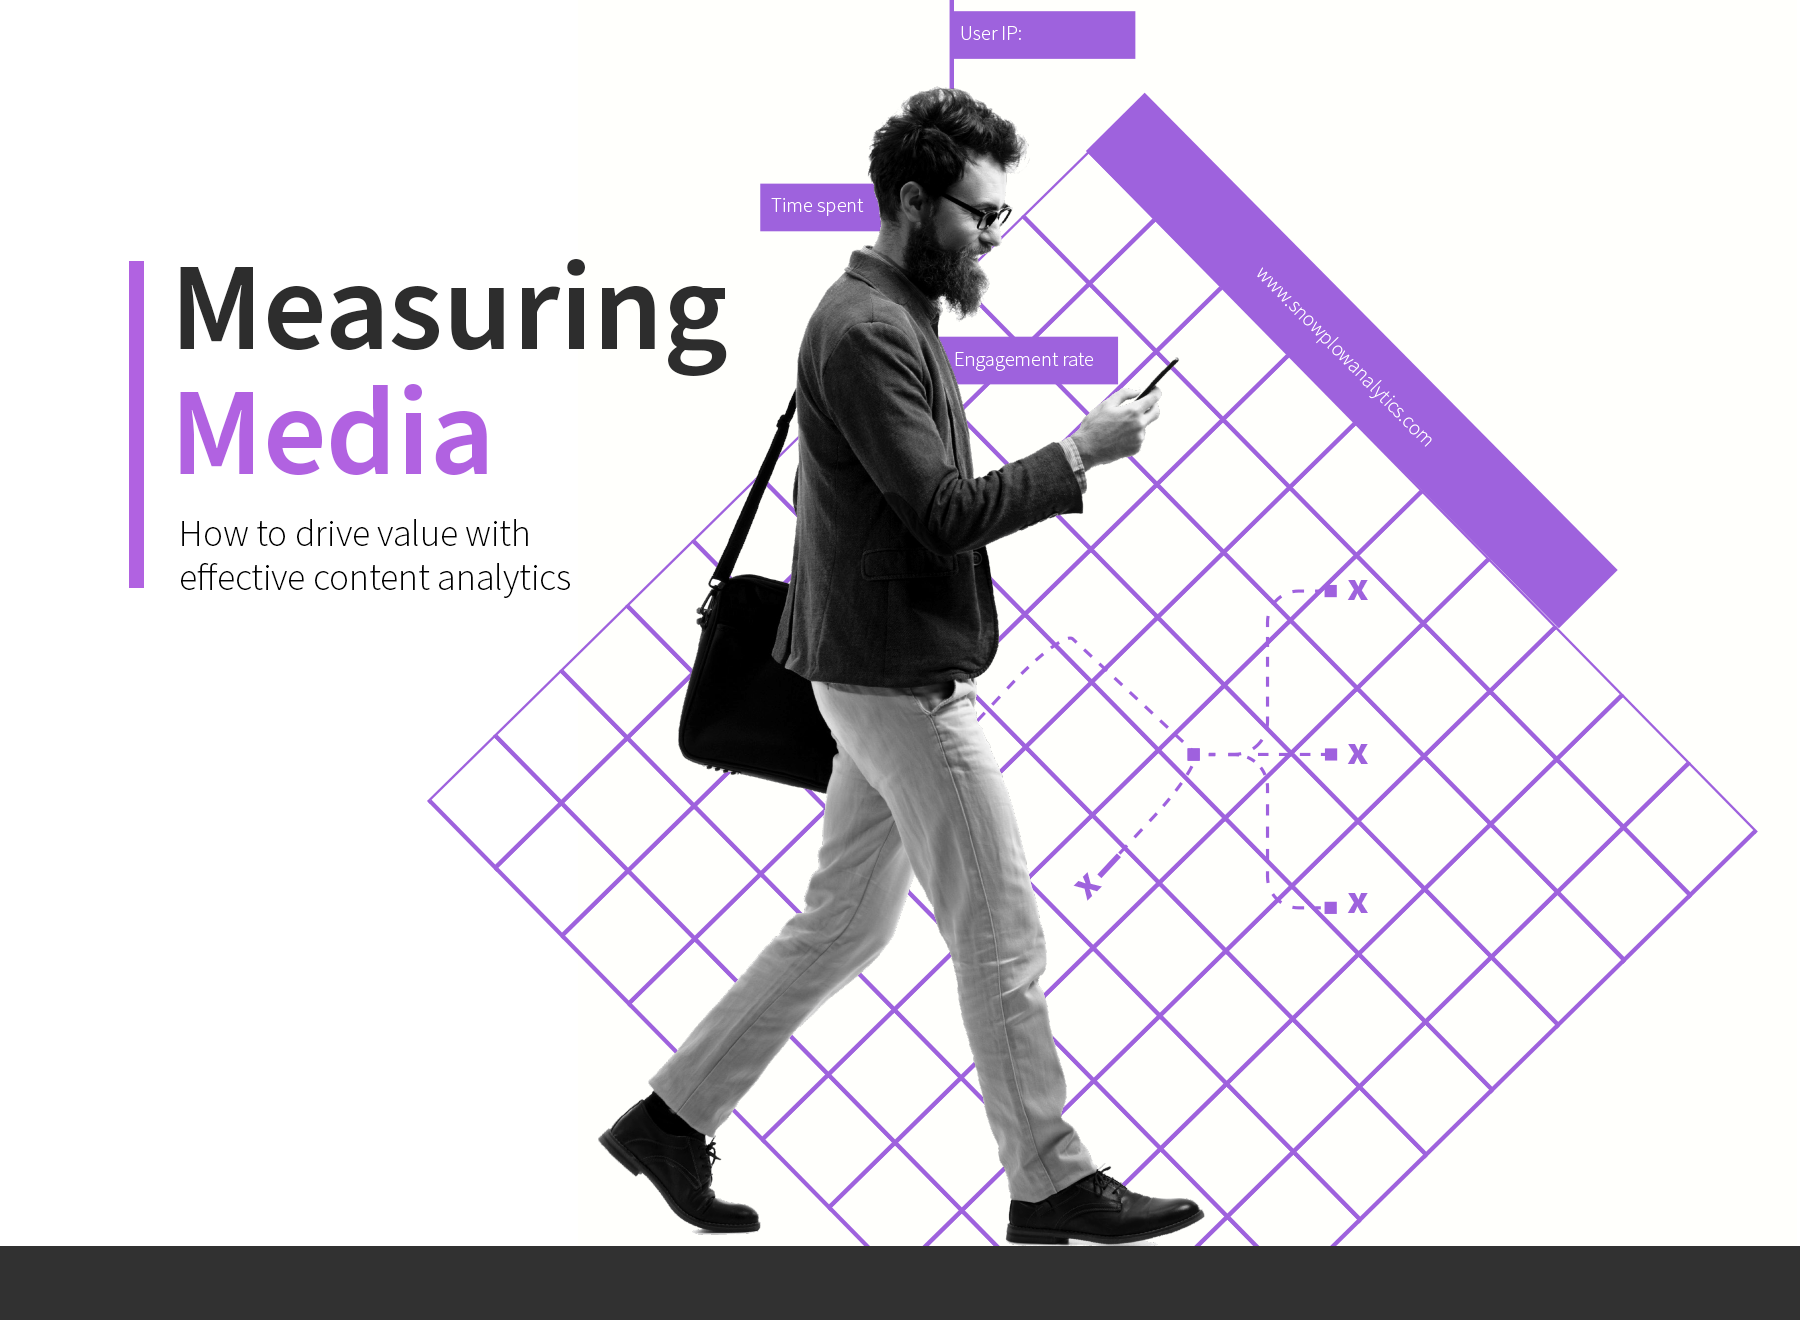 Measuring media - How to drive value with effective content analytics